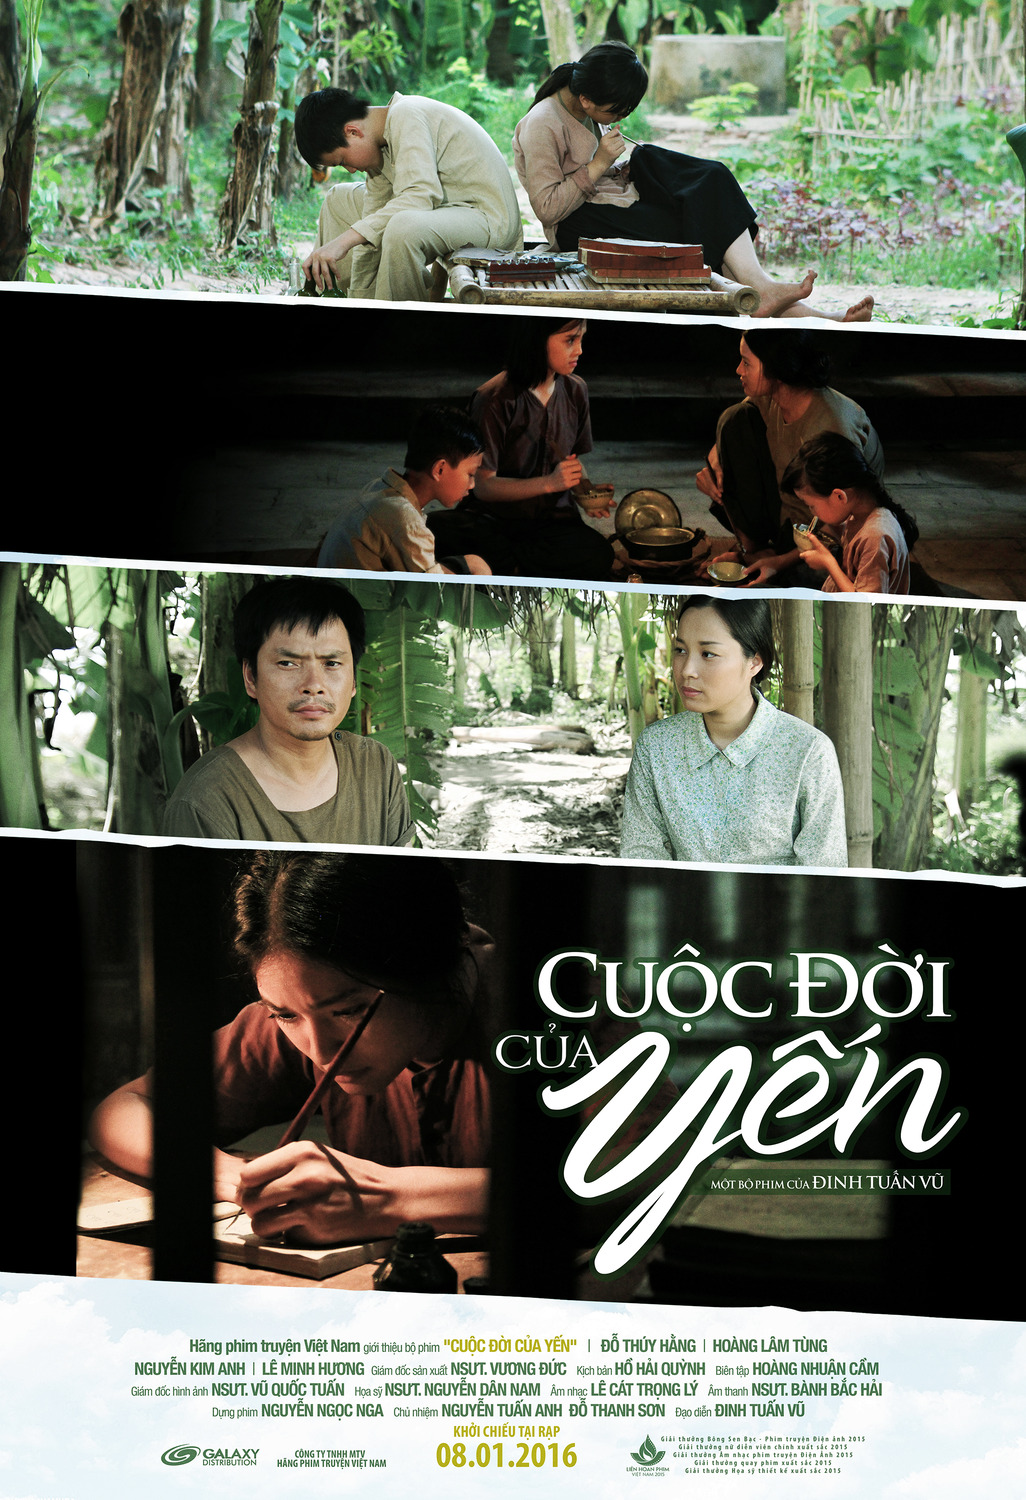 Extra Large Movie Poster Image for Cuoc doi cua Yen (#1 of 2)